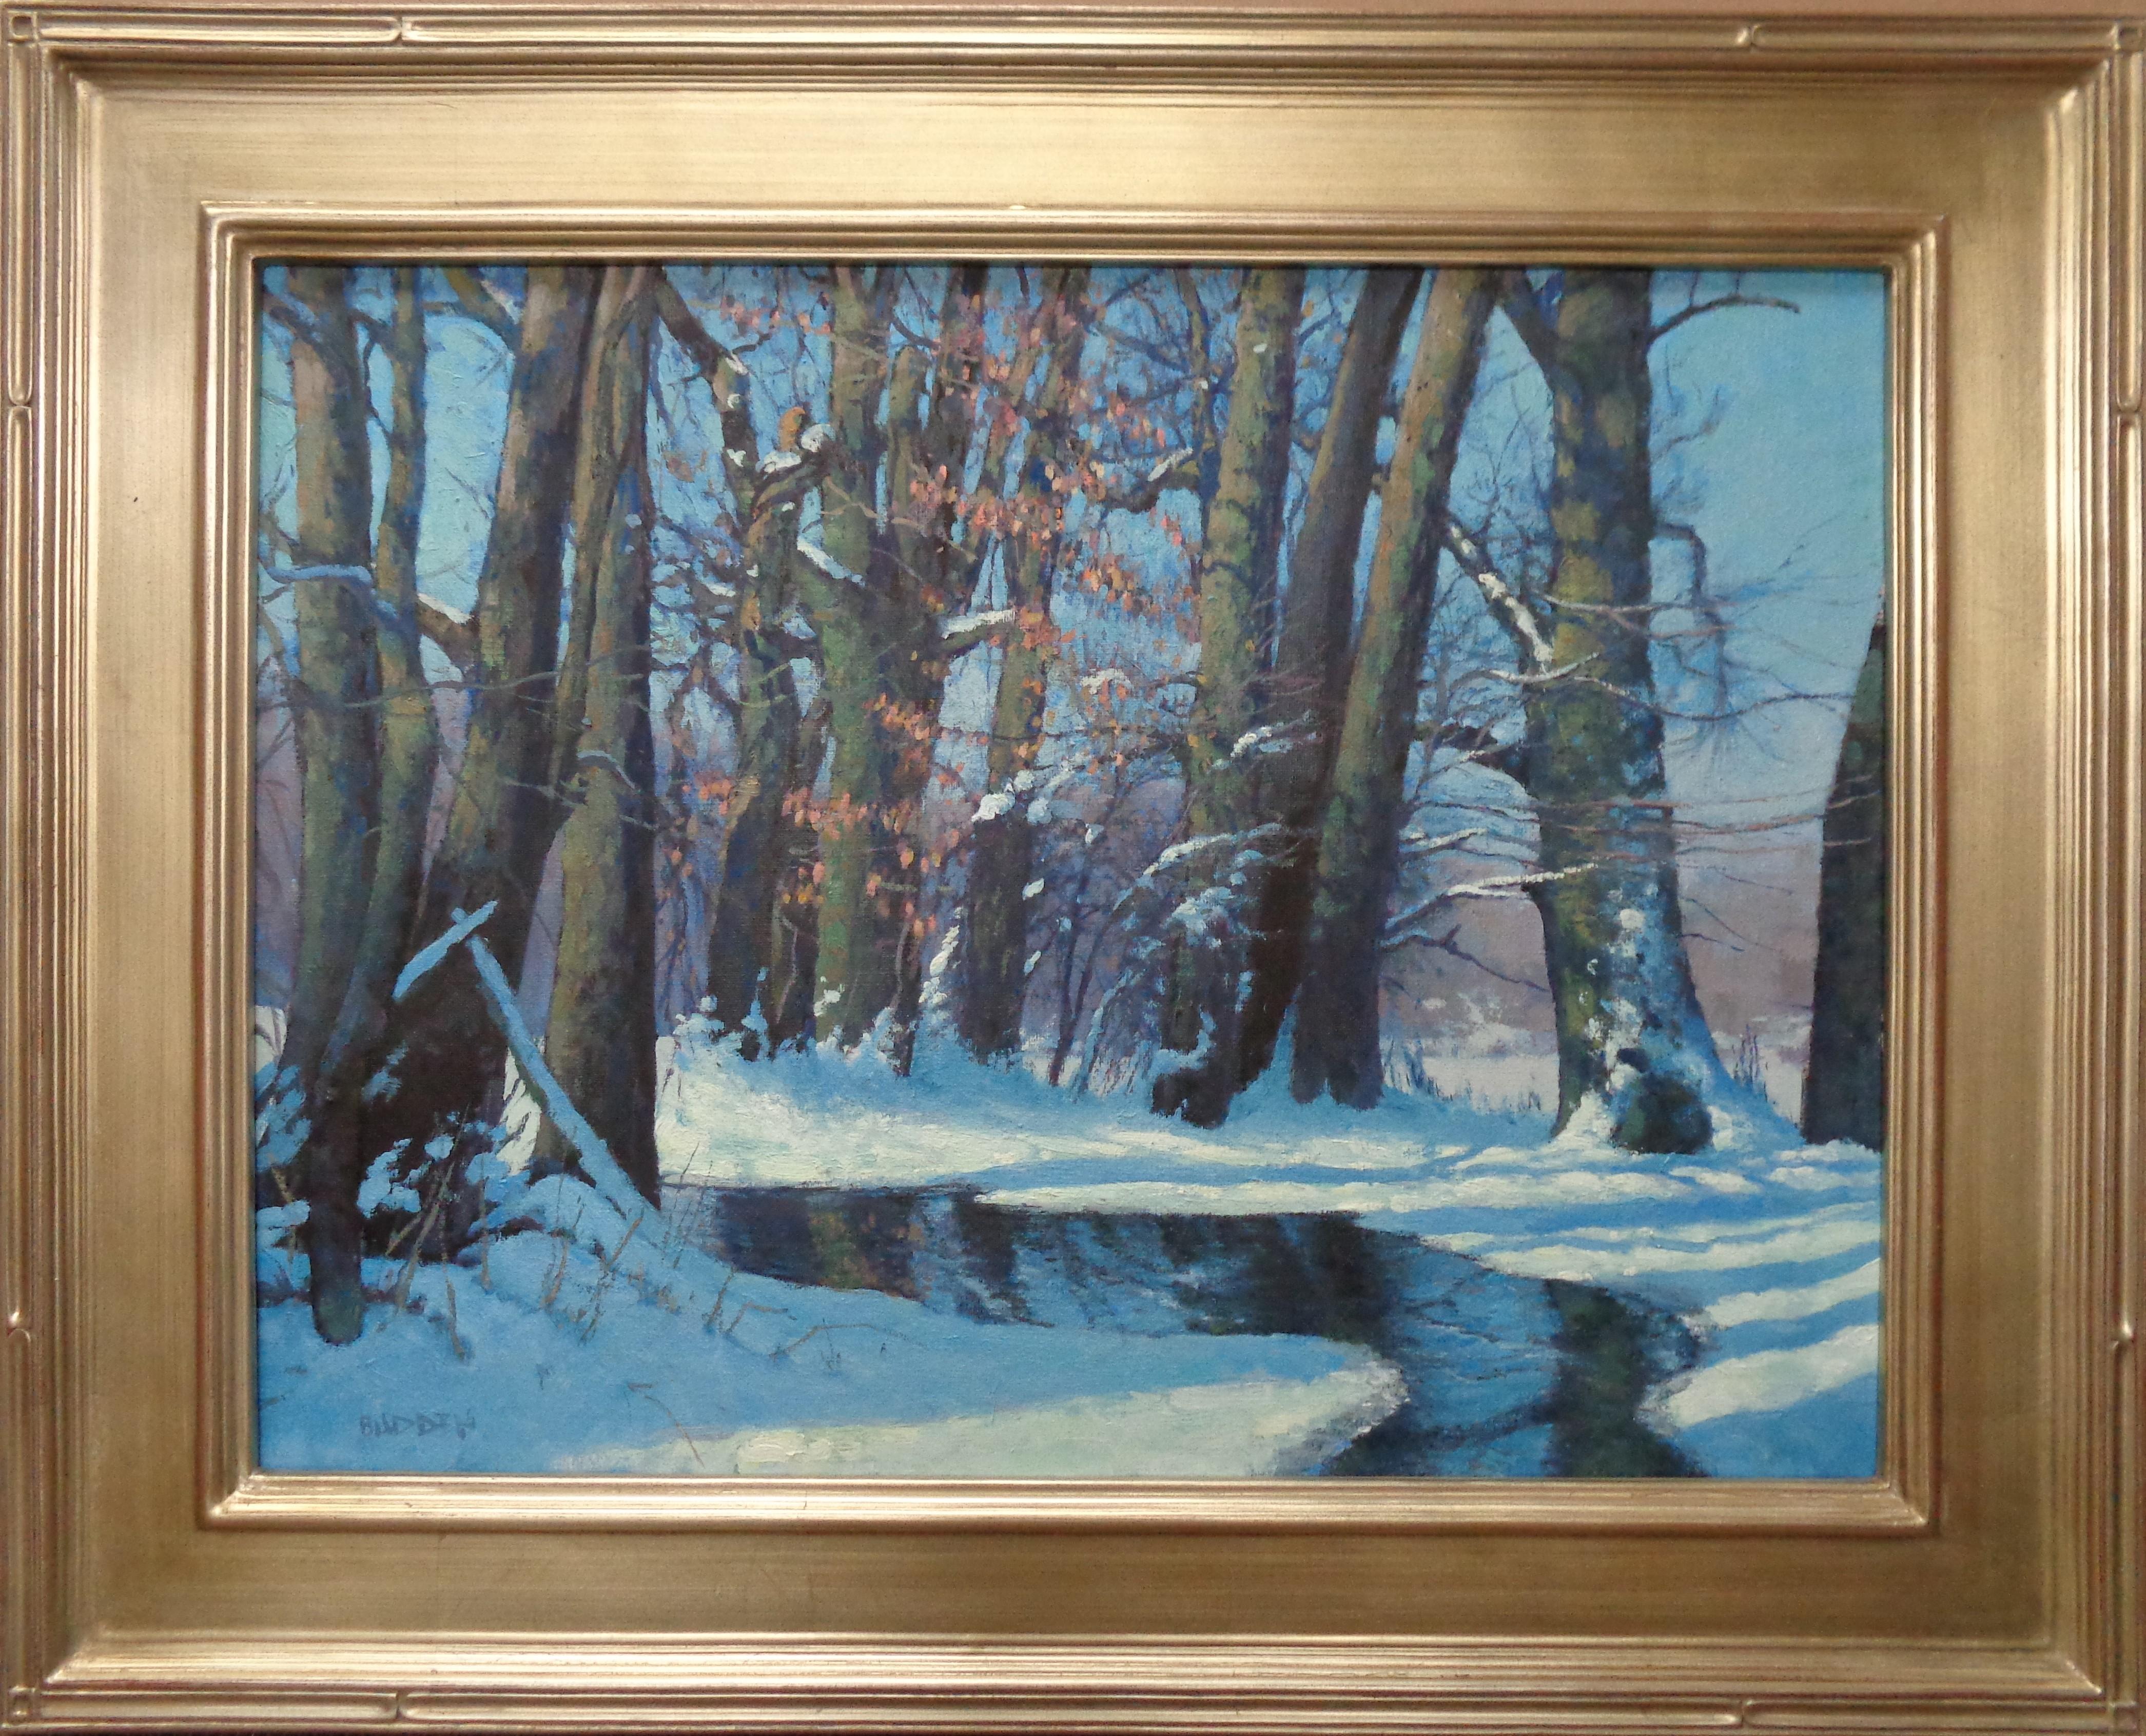 Winter Patterns
oil/linen
18 x 24 unframed, 24.38 x 30.5x1 framed
Winter Patterns is an oil painting on linen by award winning contemporary artist Michael Budden that showcases a winter woodland landscape and stream with a nice play of light and